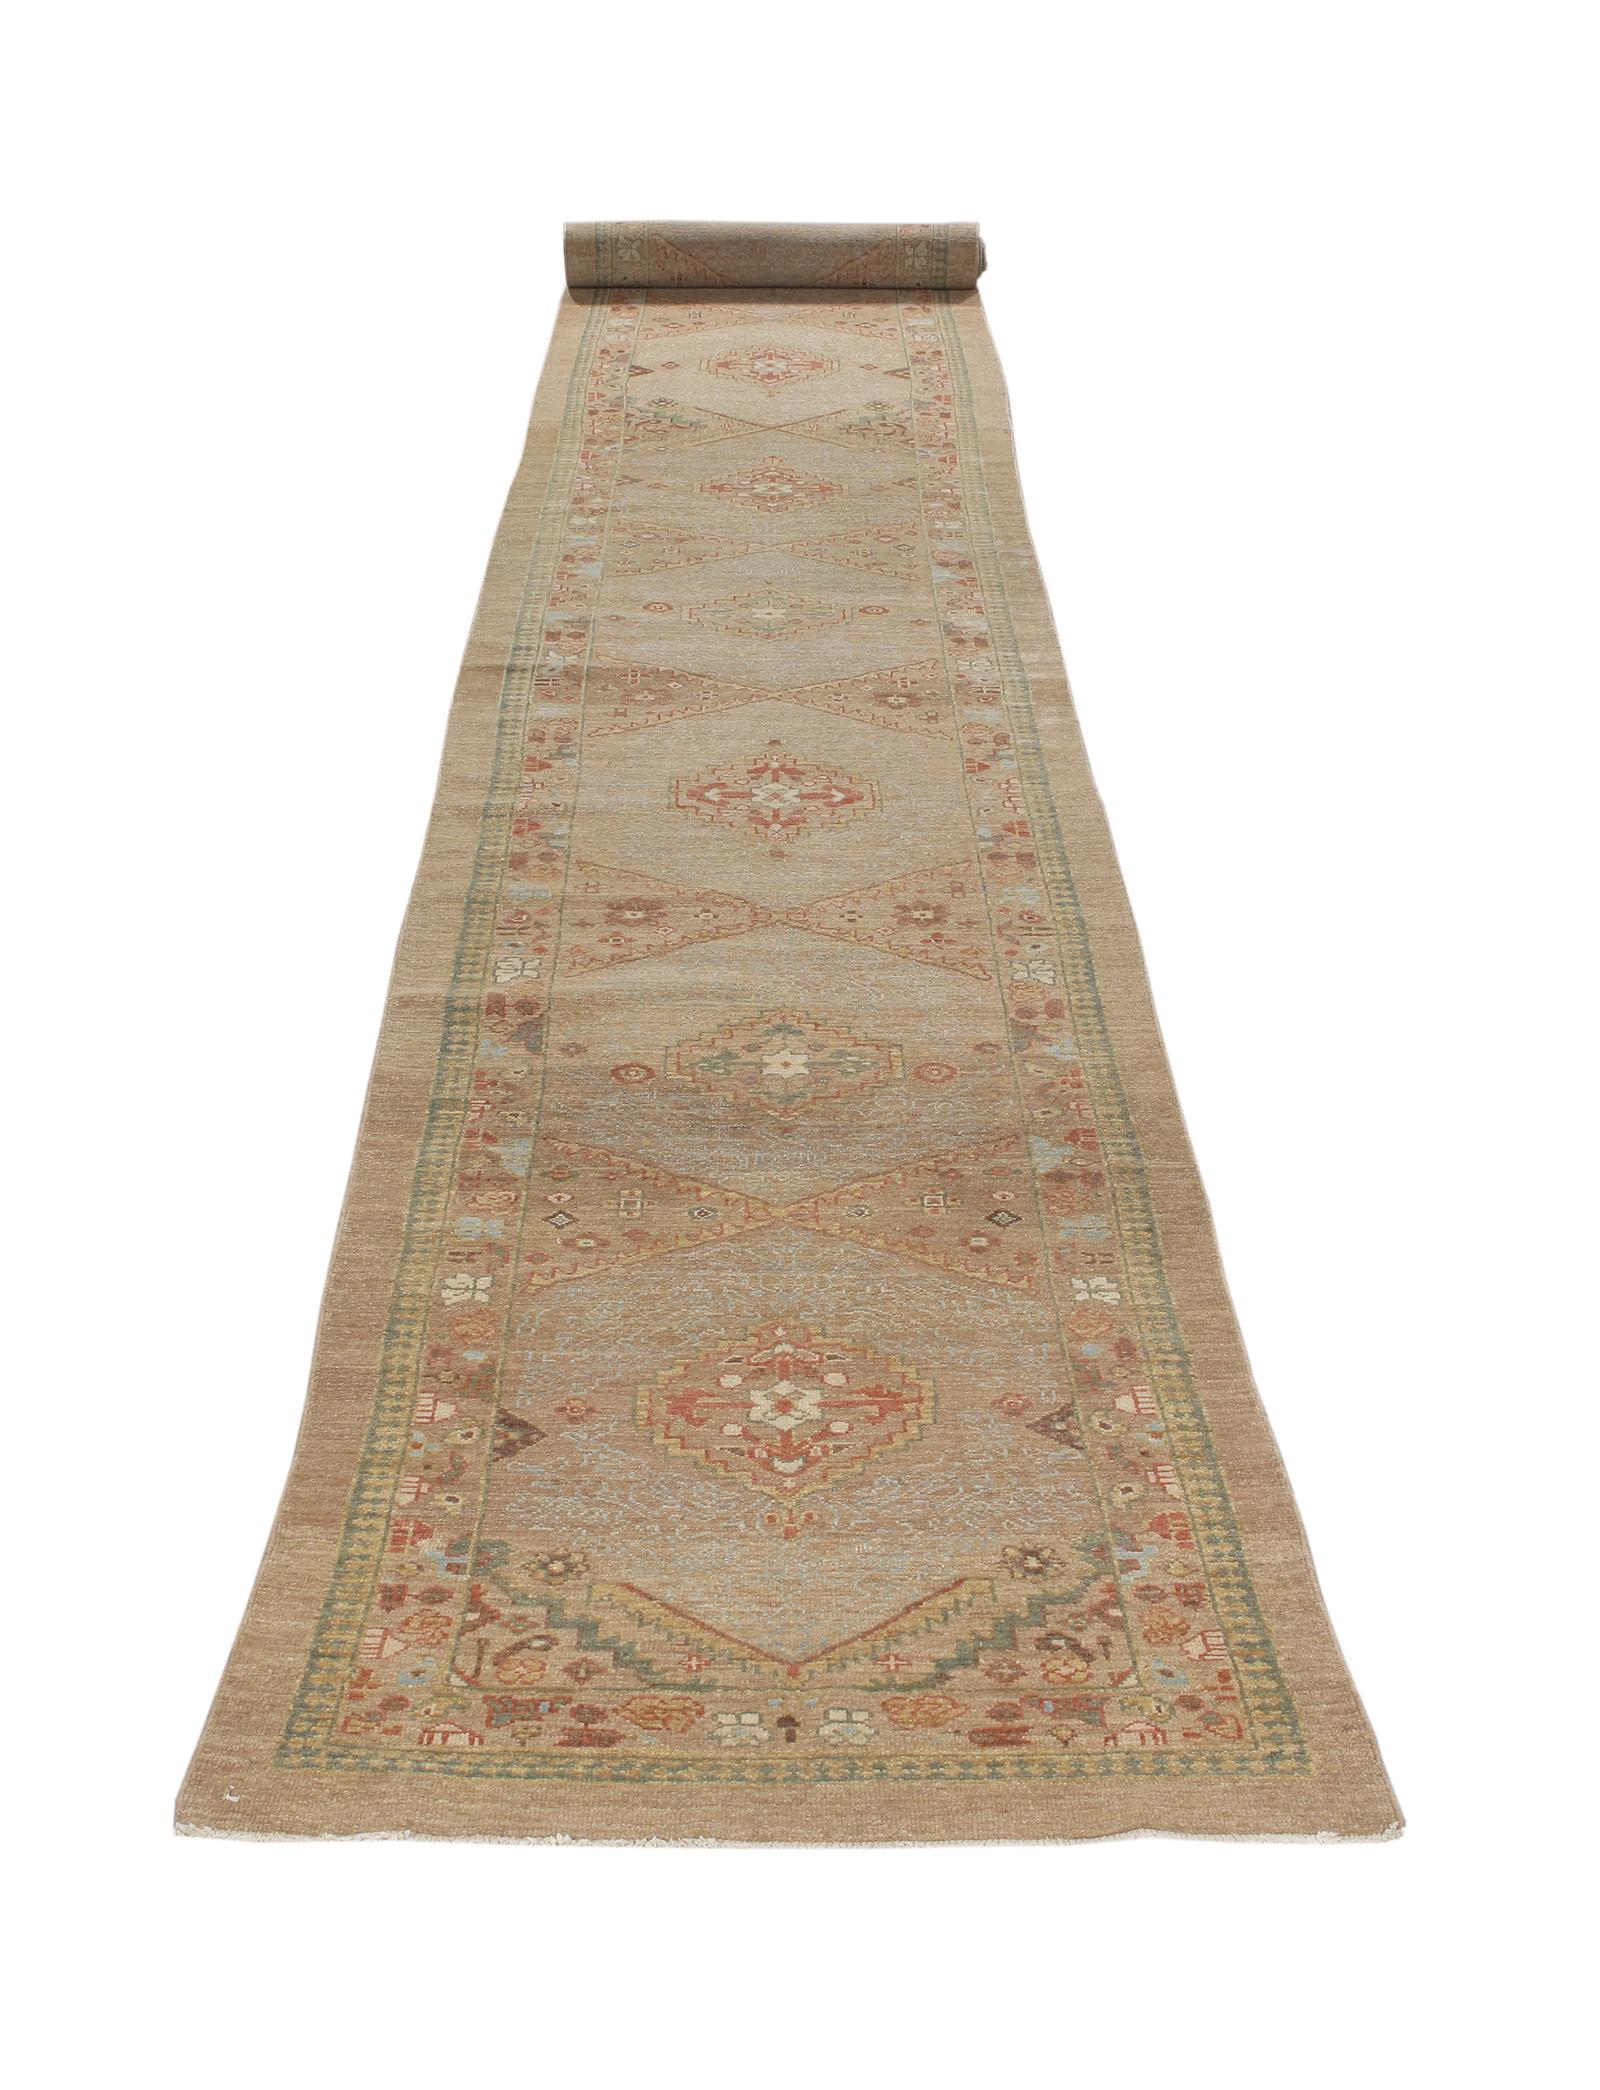 This Persian tribal hand-knotted runner rug is crafted with the finest hand-carded, hand-spun wool, and is made with all natural dyes. It resembles the antique original pieces designed by the Kurdish weavers in the northwestern part of Iran. Custom